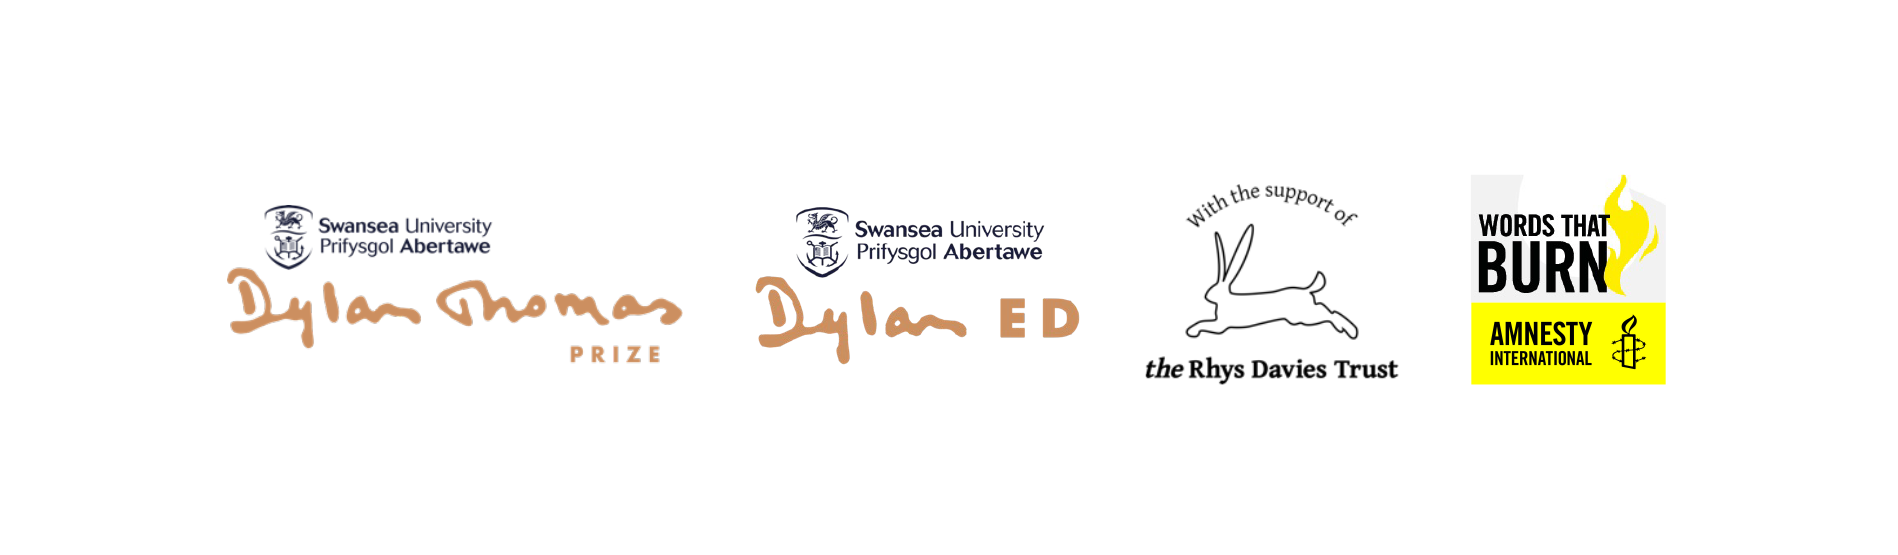 Logos of Dylan Thomas Prize, DylanED, Rhys Davies Trust and Amnesty International